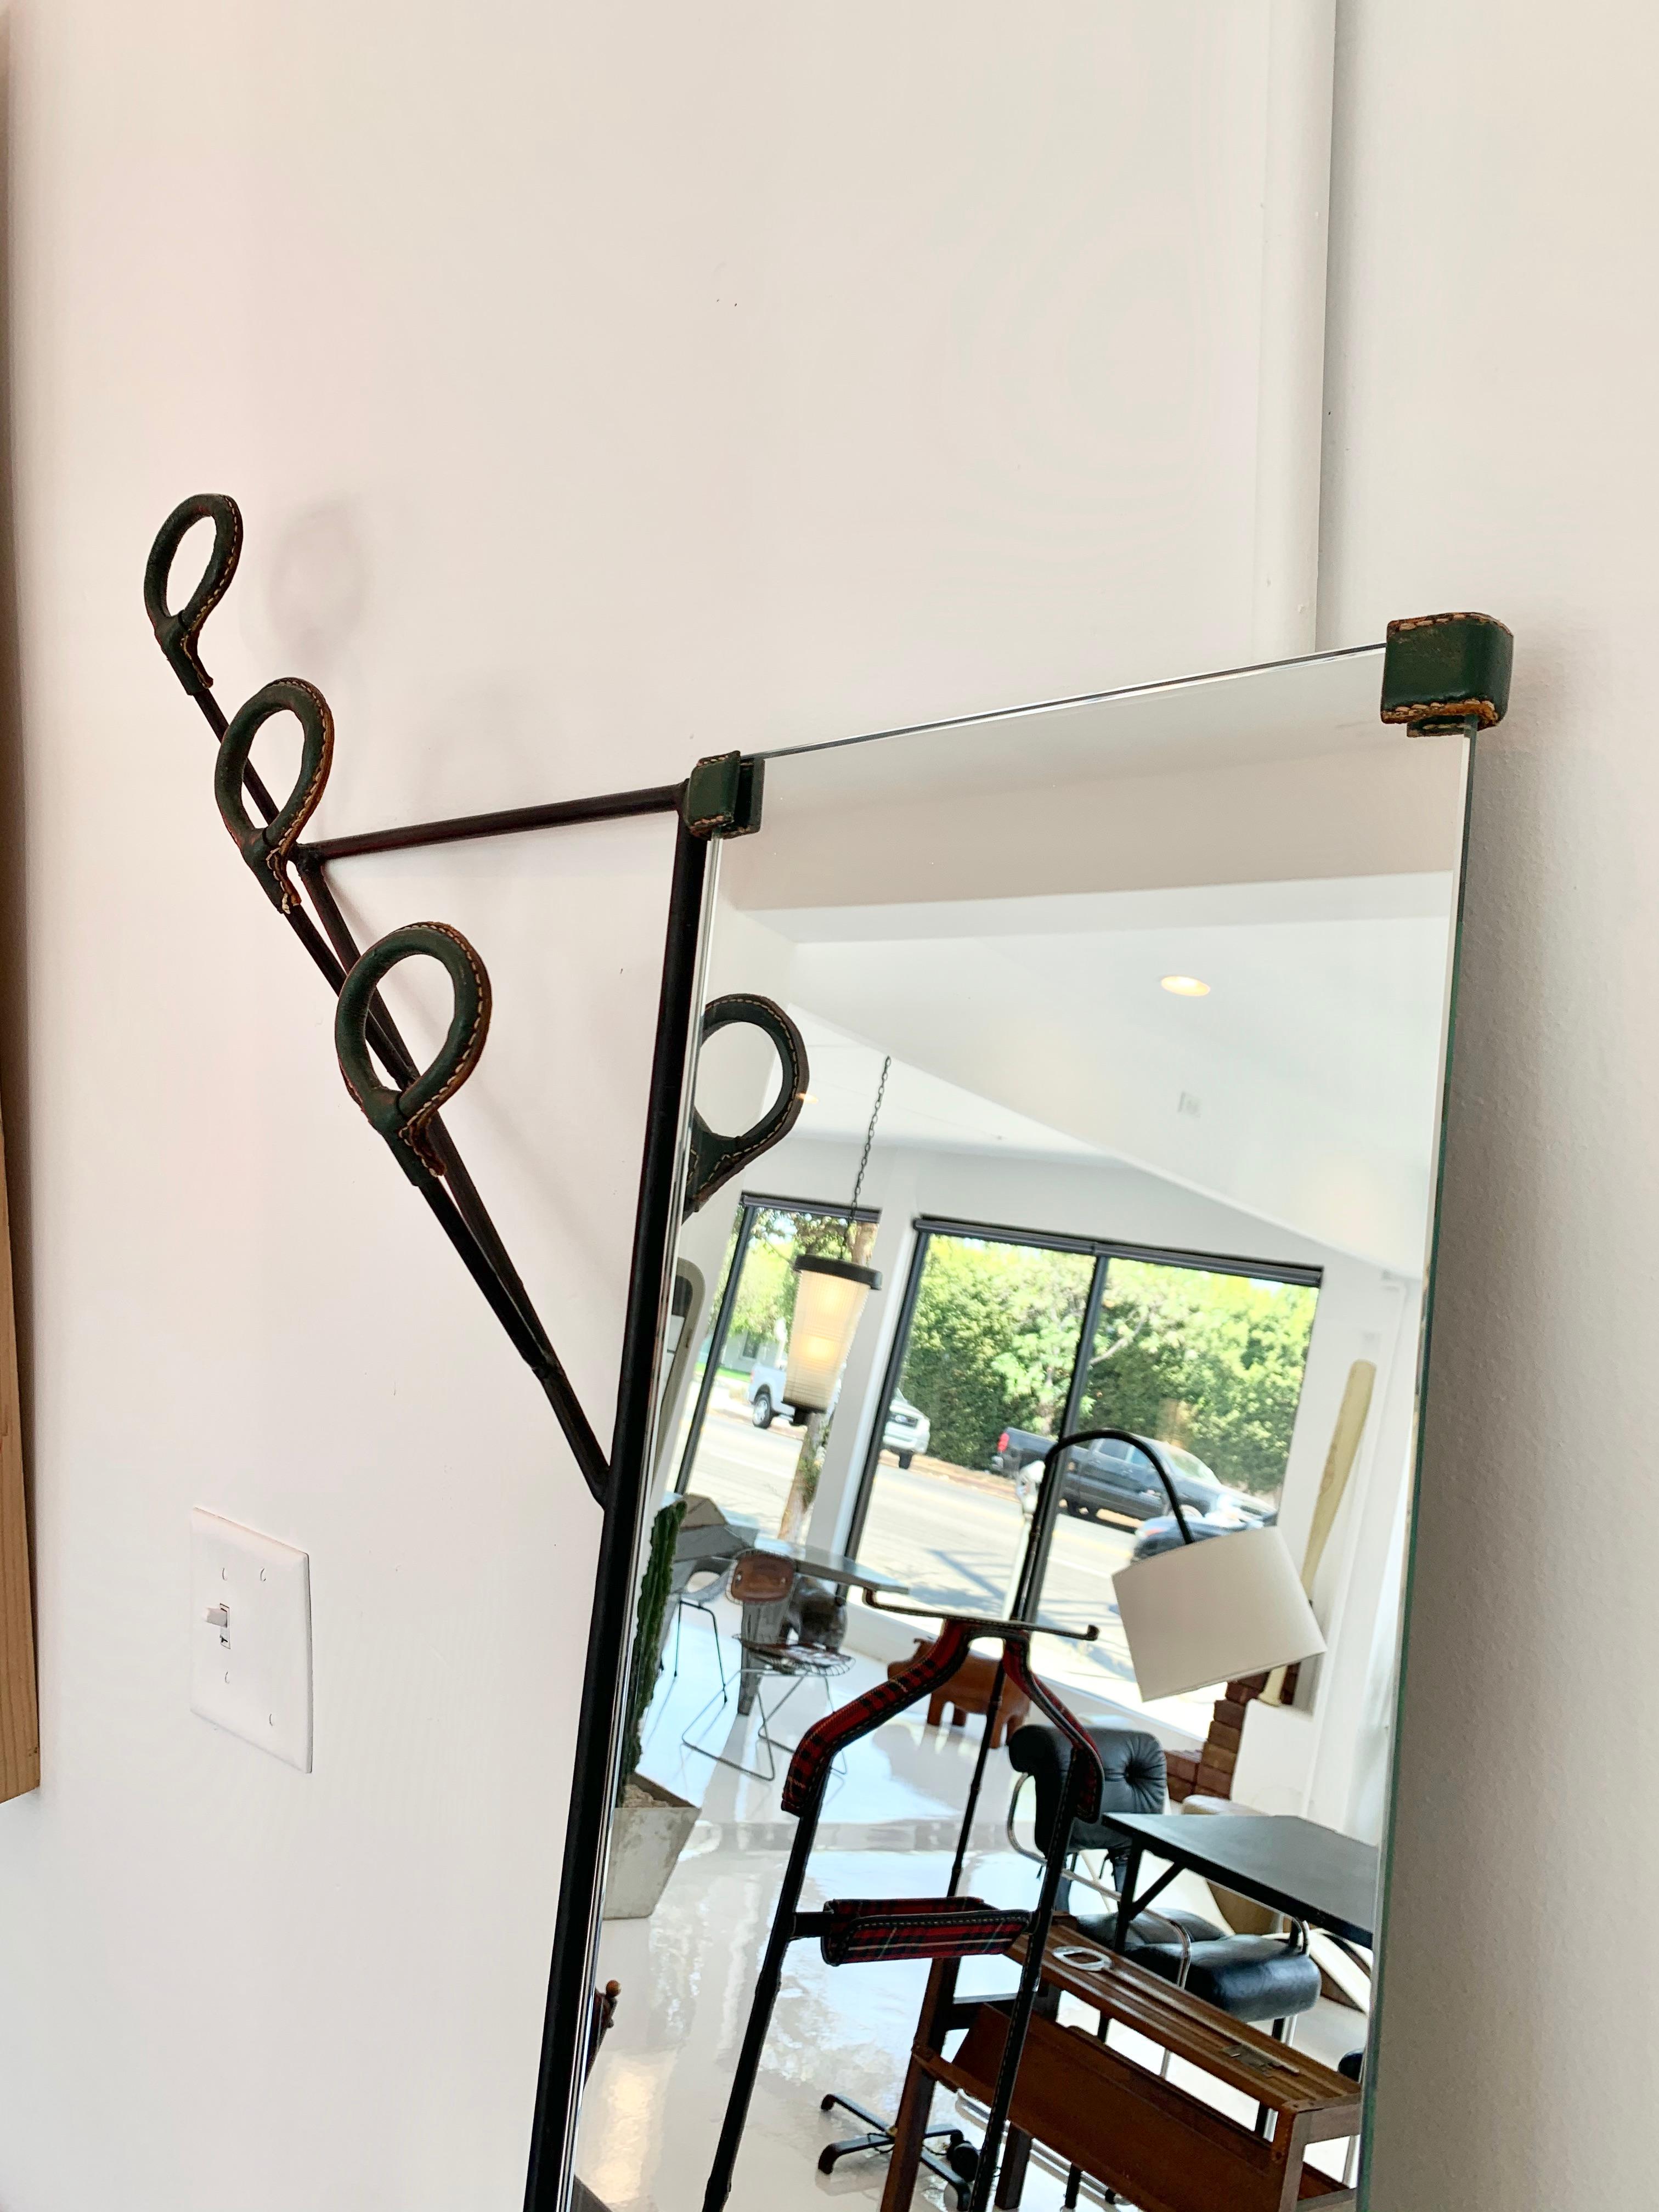 Stunning wall rack by Jacques Adnet. Rack consists of three hooks, a mirror and umbrella holder. Iron frame with dark green saddle leather with signature Adnet contrast stitching. Stunning piece of collectible Adnet. Extremely functional and rare.